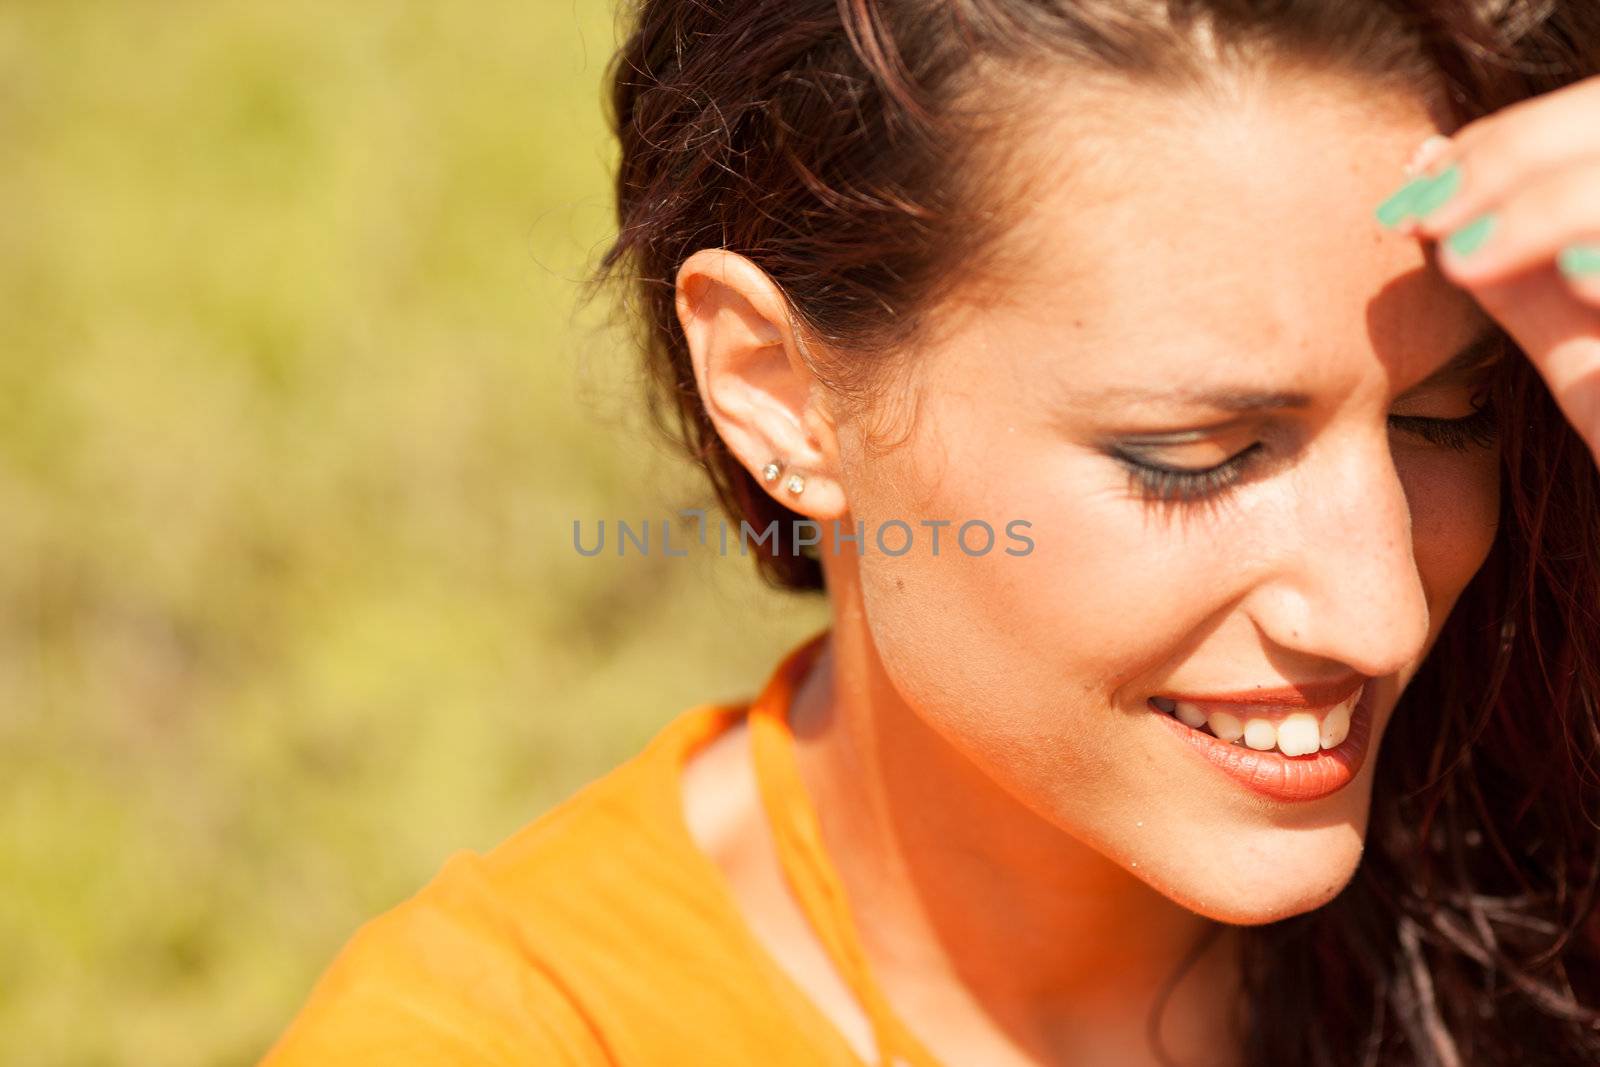 Portrait of young beautiful woman laughing wearing orange shirt by Lcrespi